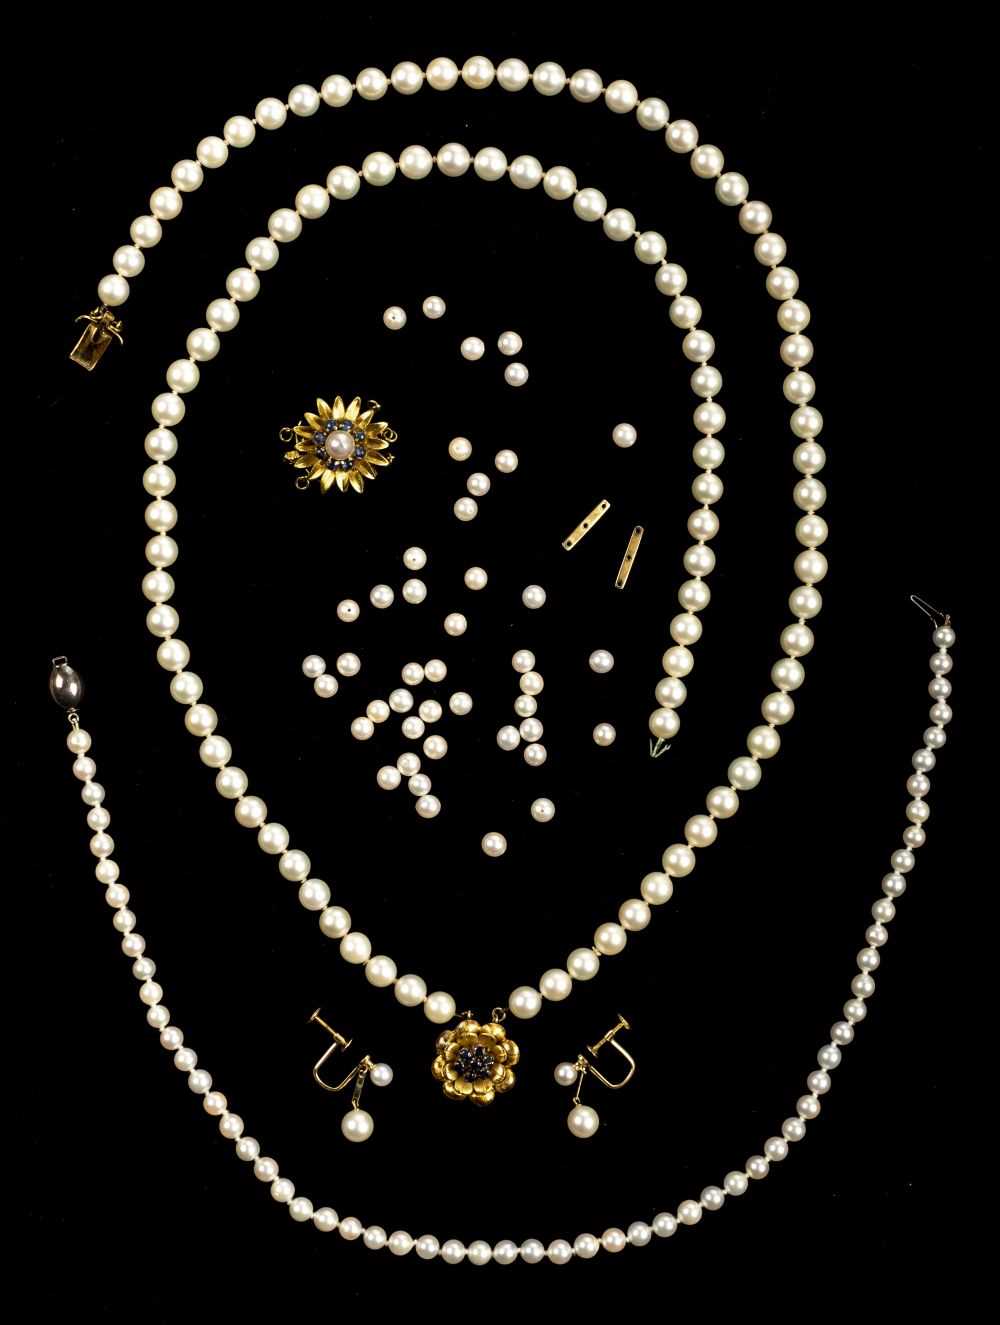 Lot 17 - Necklace. A Continental pearl necklace with 14K gold clasp